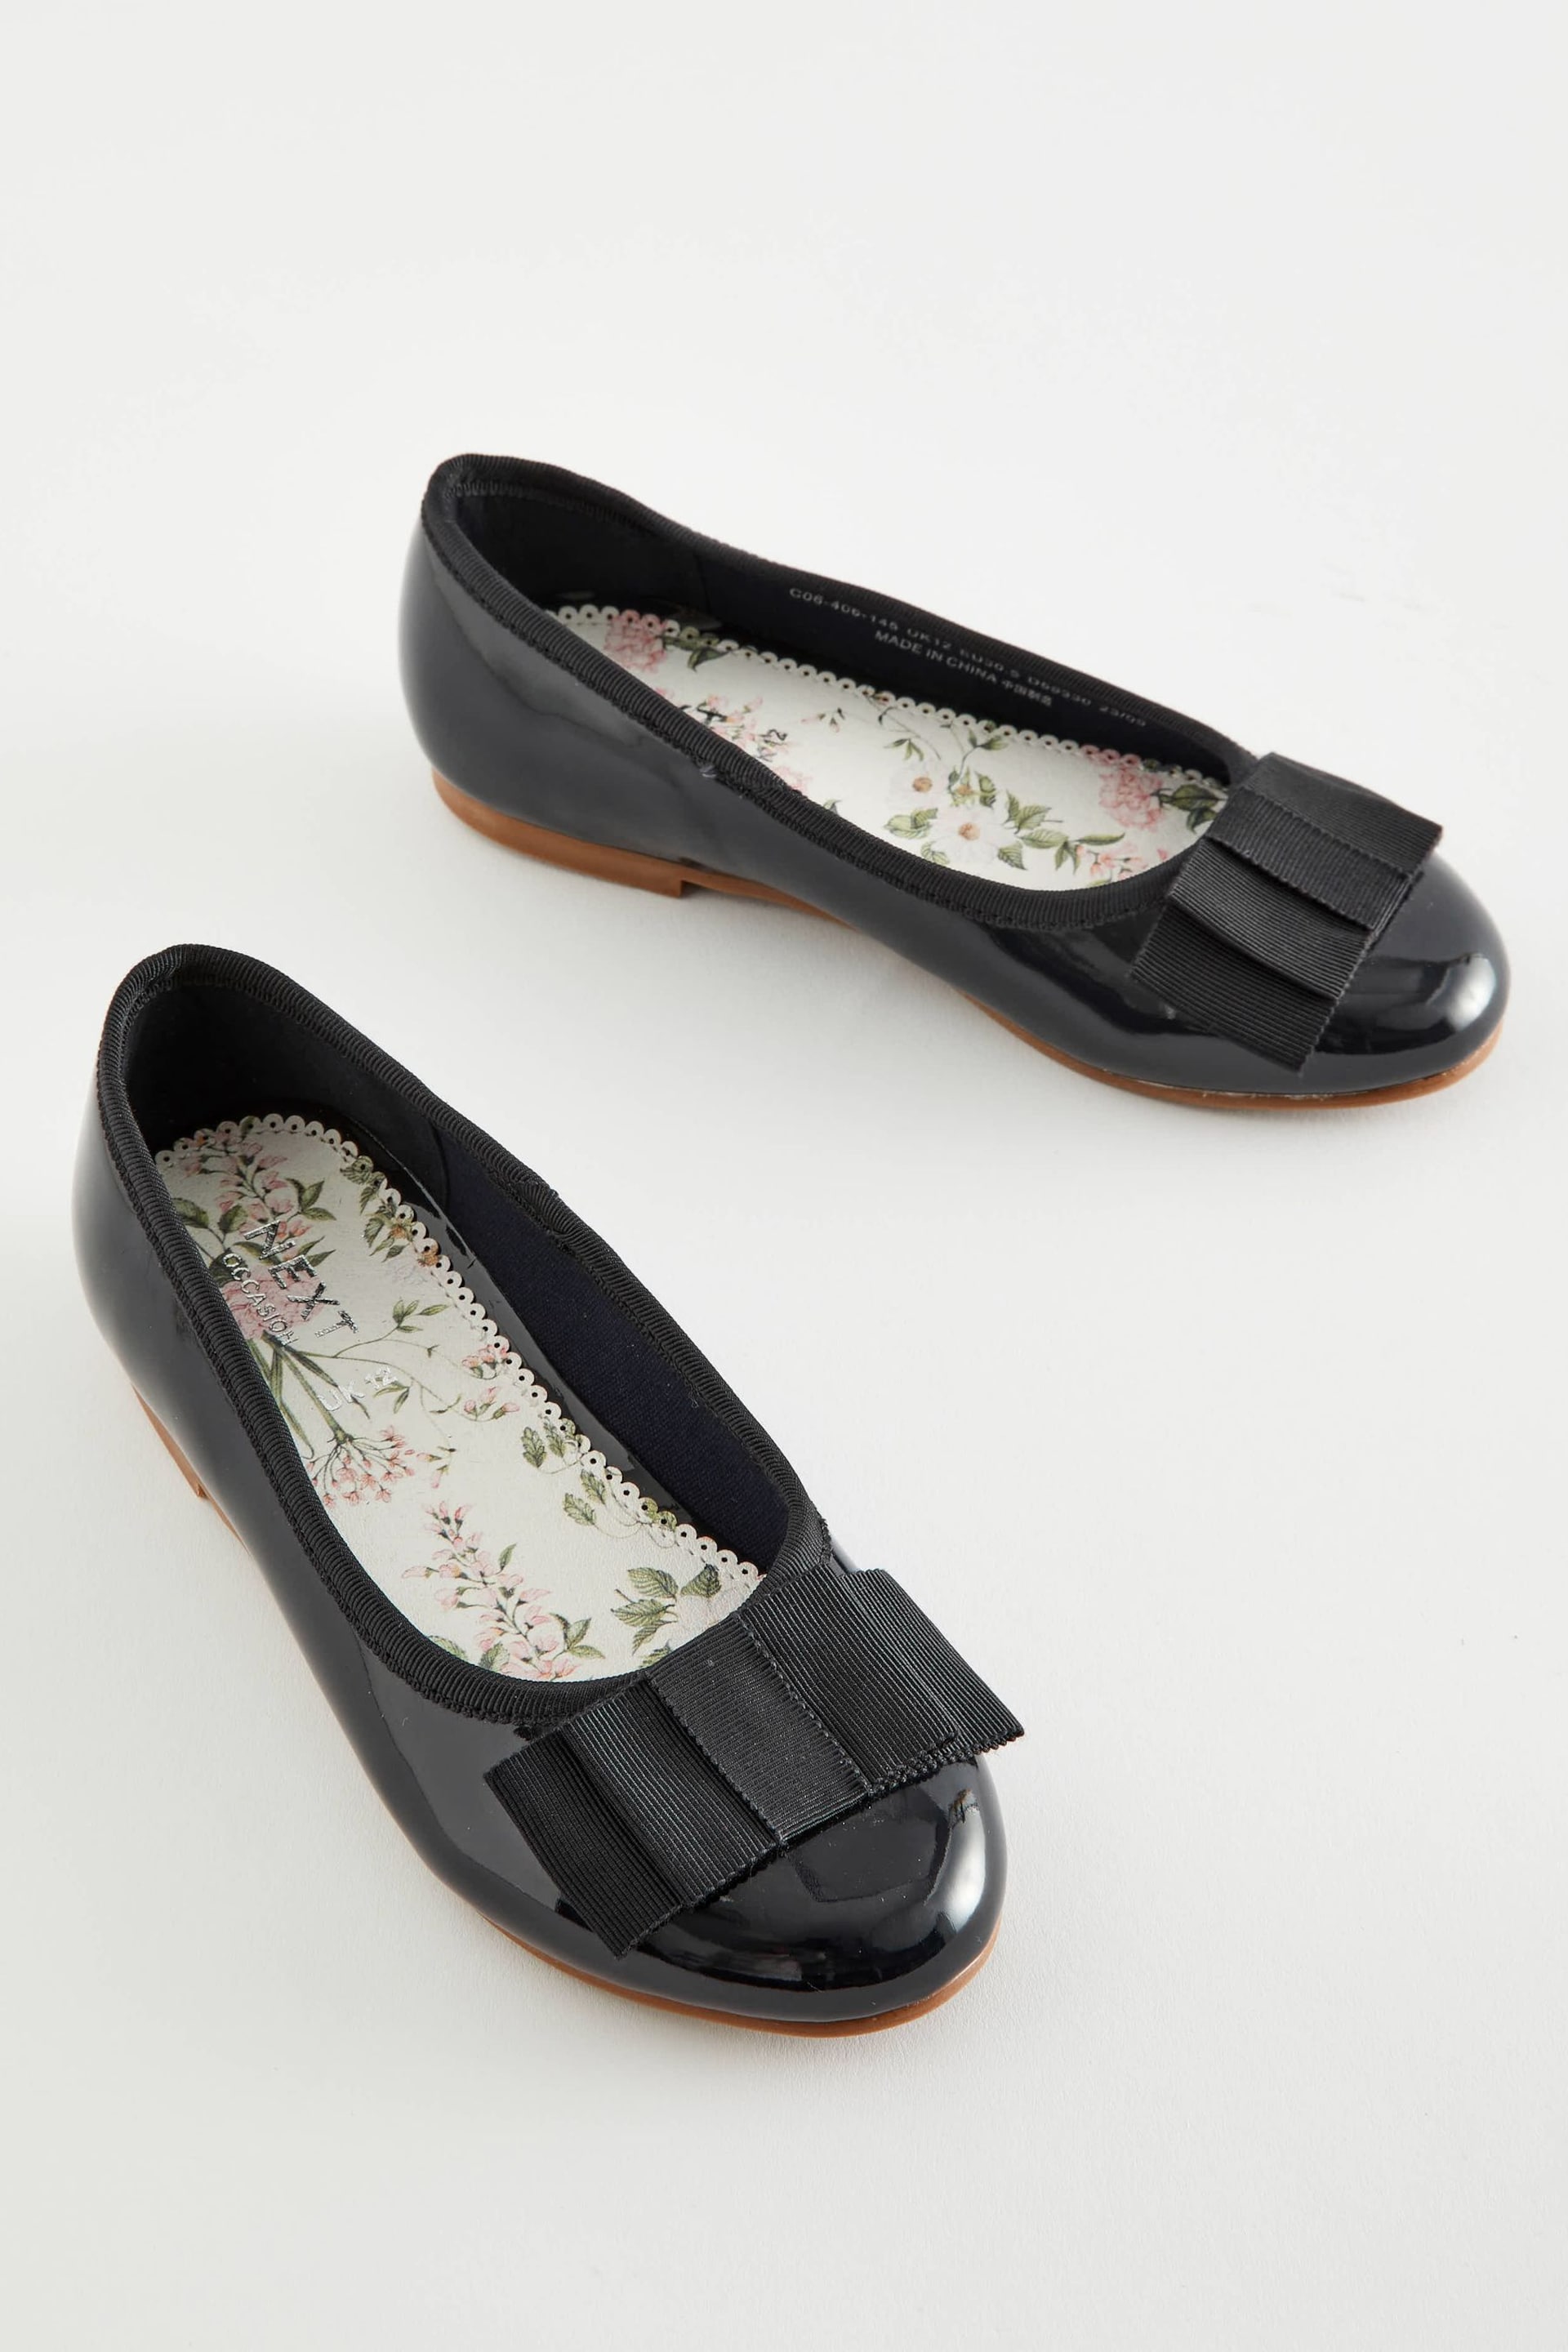 Navy Patent Bow Occasion Ballerinas Shoes - Image 1 of 5